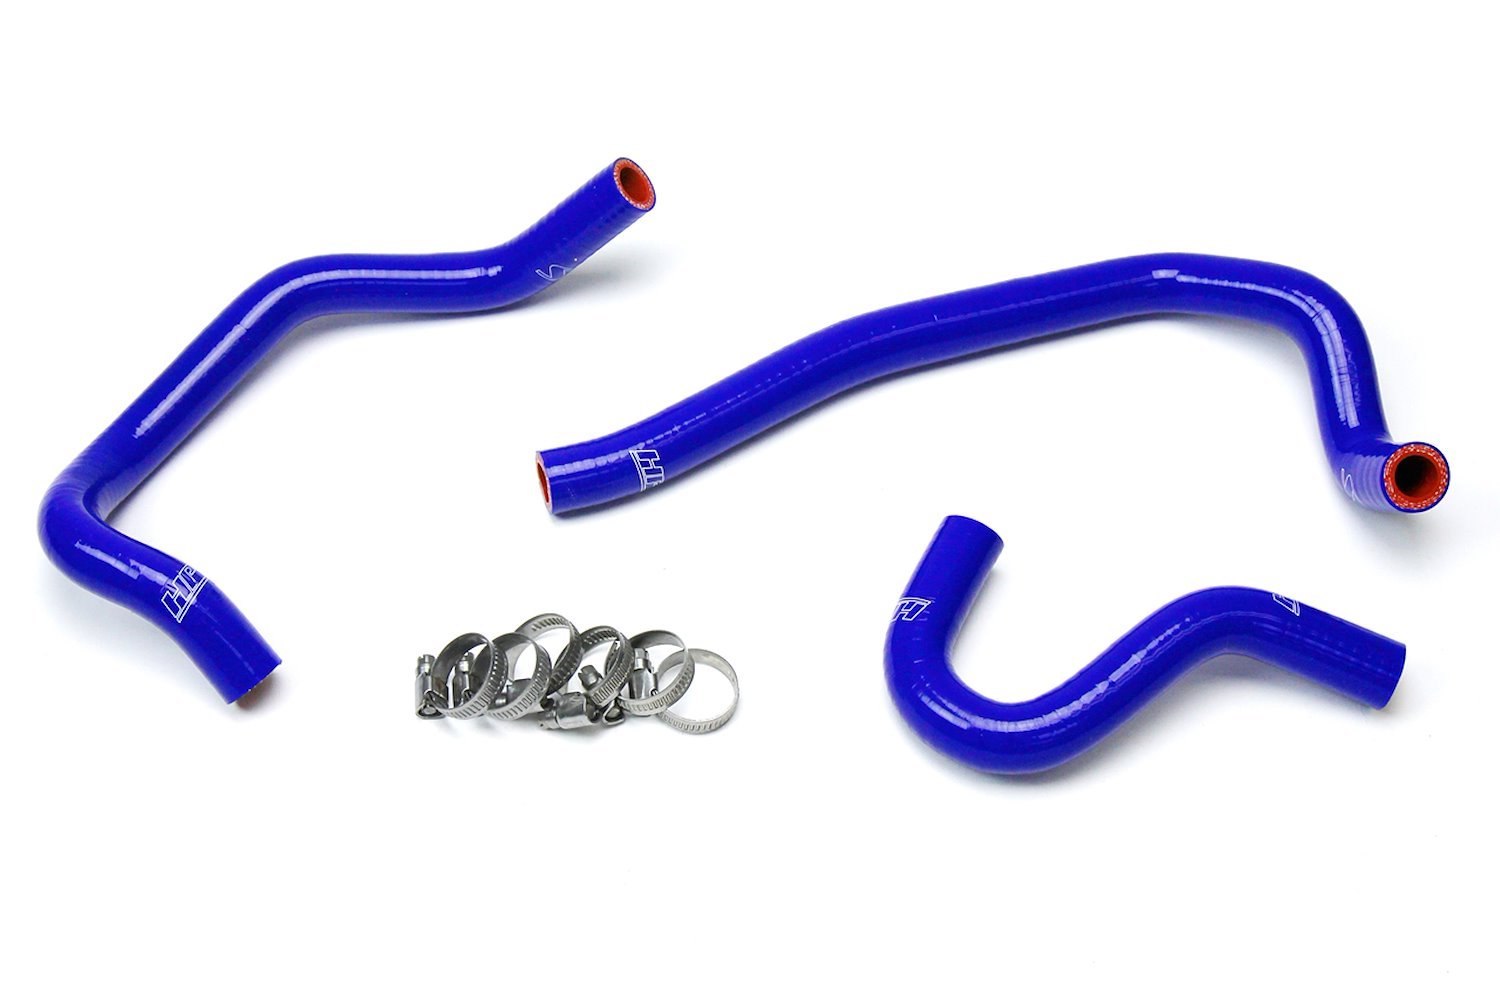 57-1520-BLUE Heater Hose Kit, High-Temp 3-Ply Reinforced Silicone, Replace OEM Rubber Heater Coolant Hoses